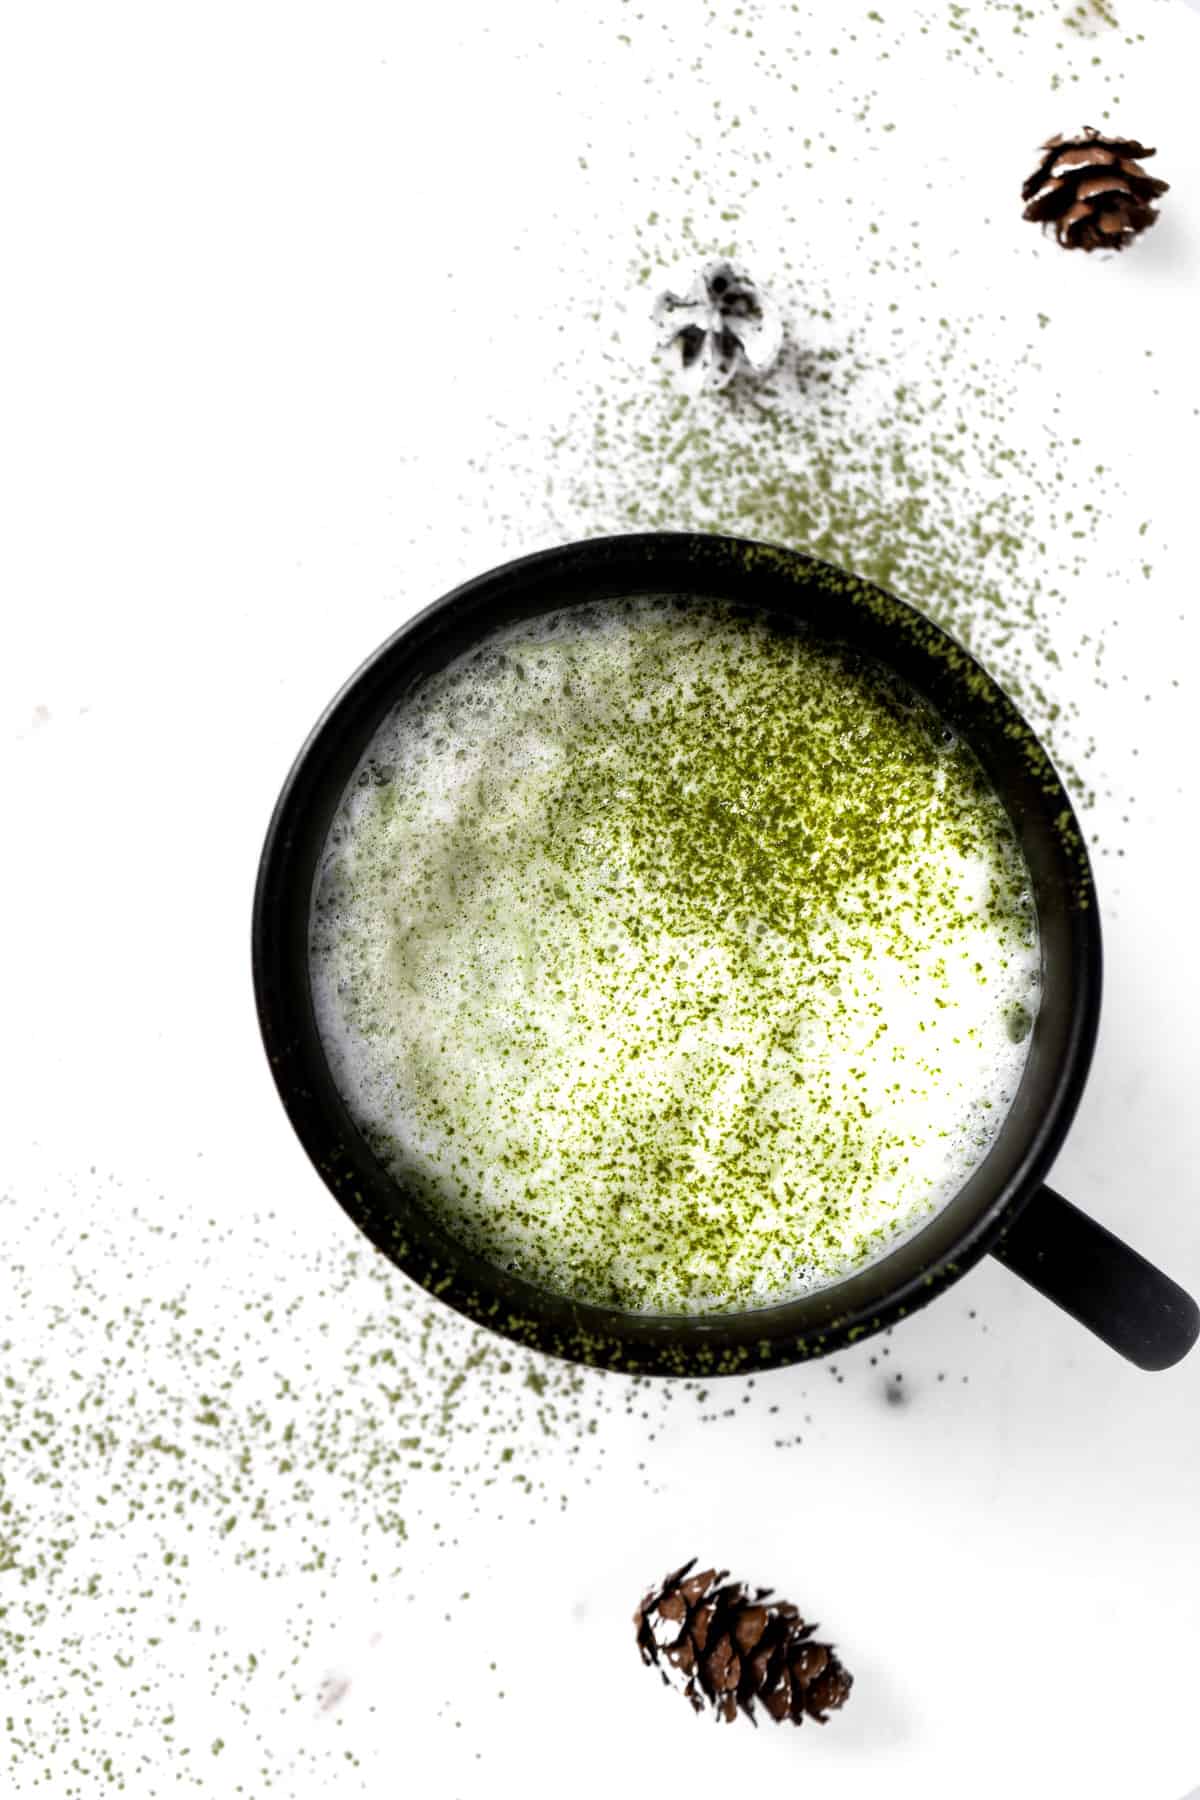 A cup of oat milk matcha latte in a black mug, sprinkled with matcha powder on a white table.